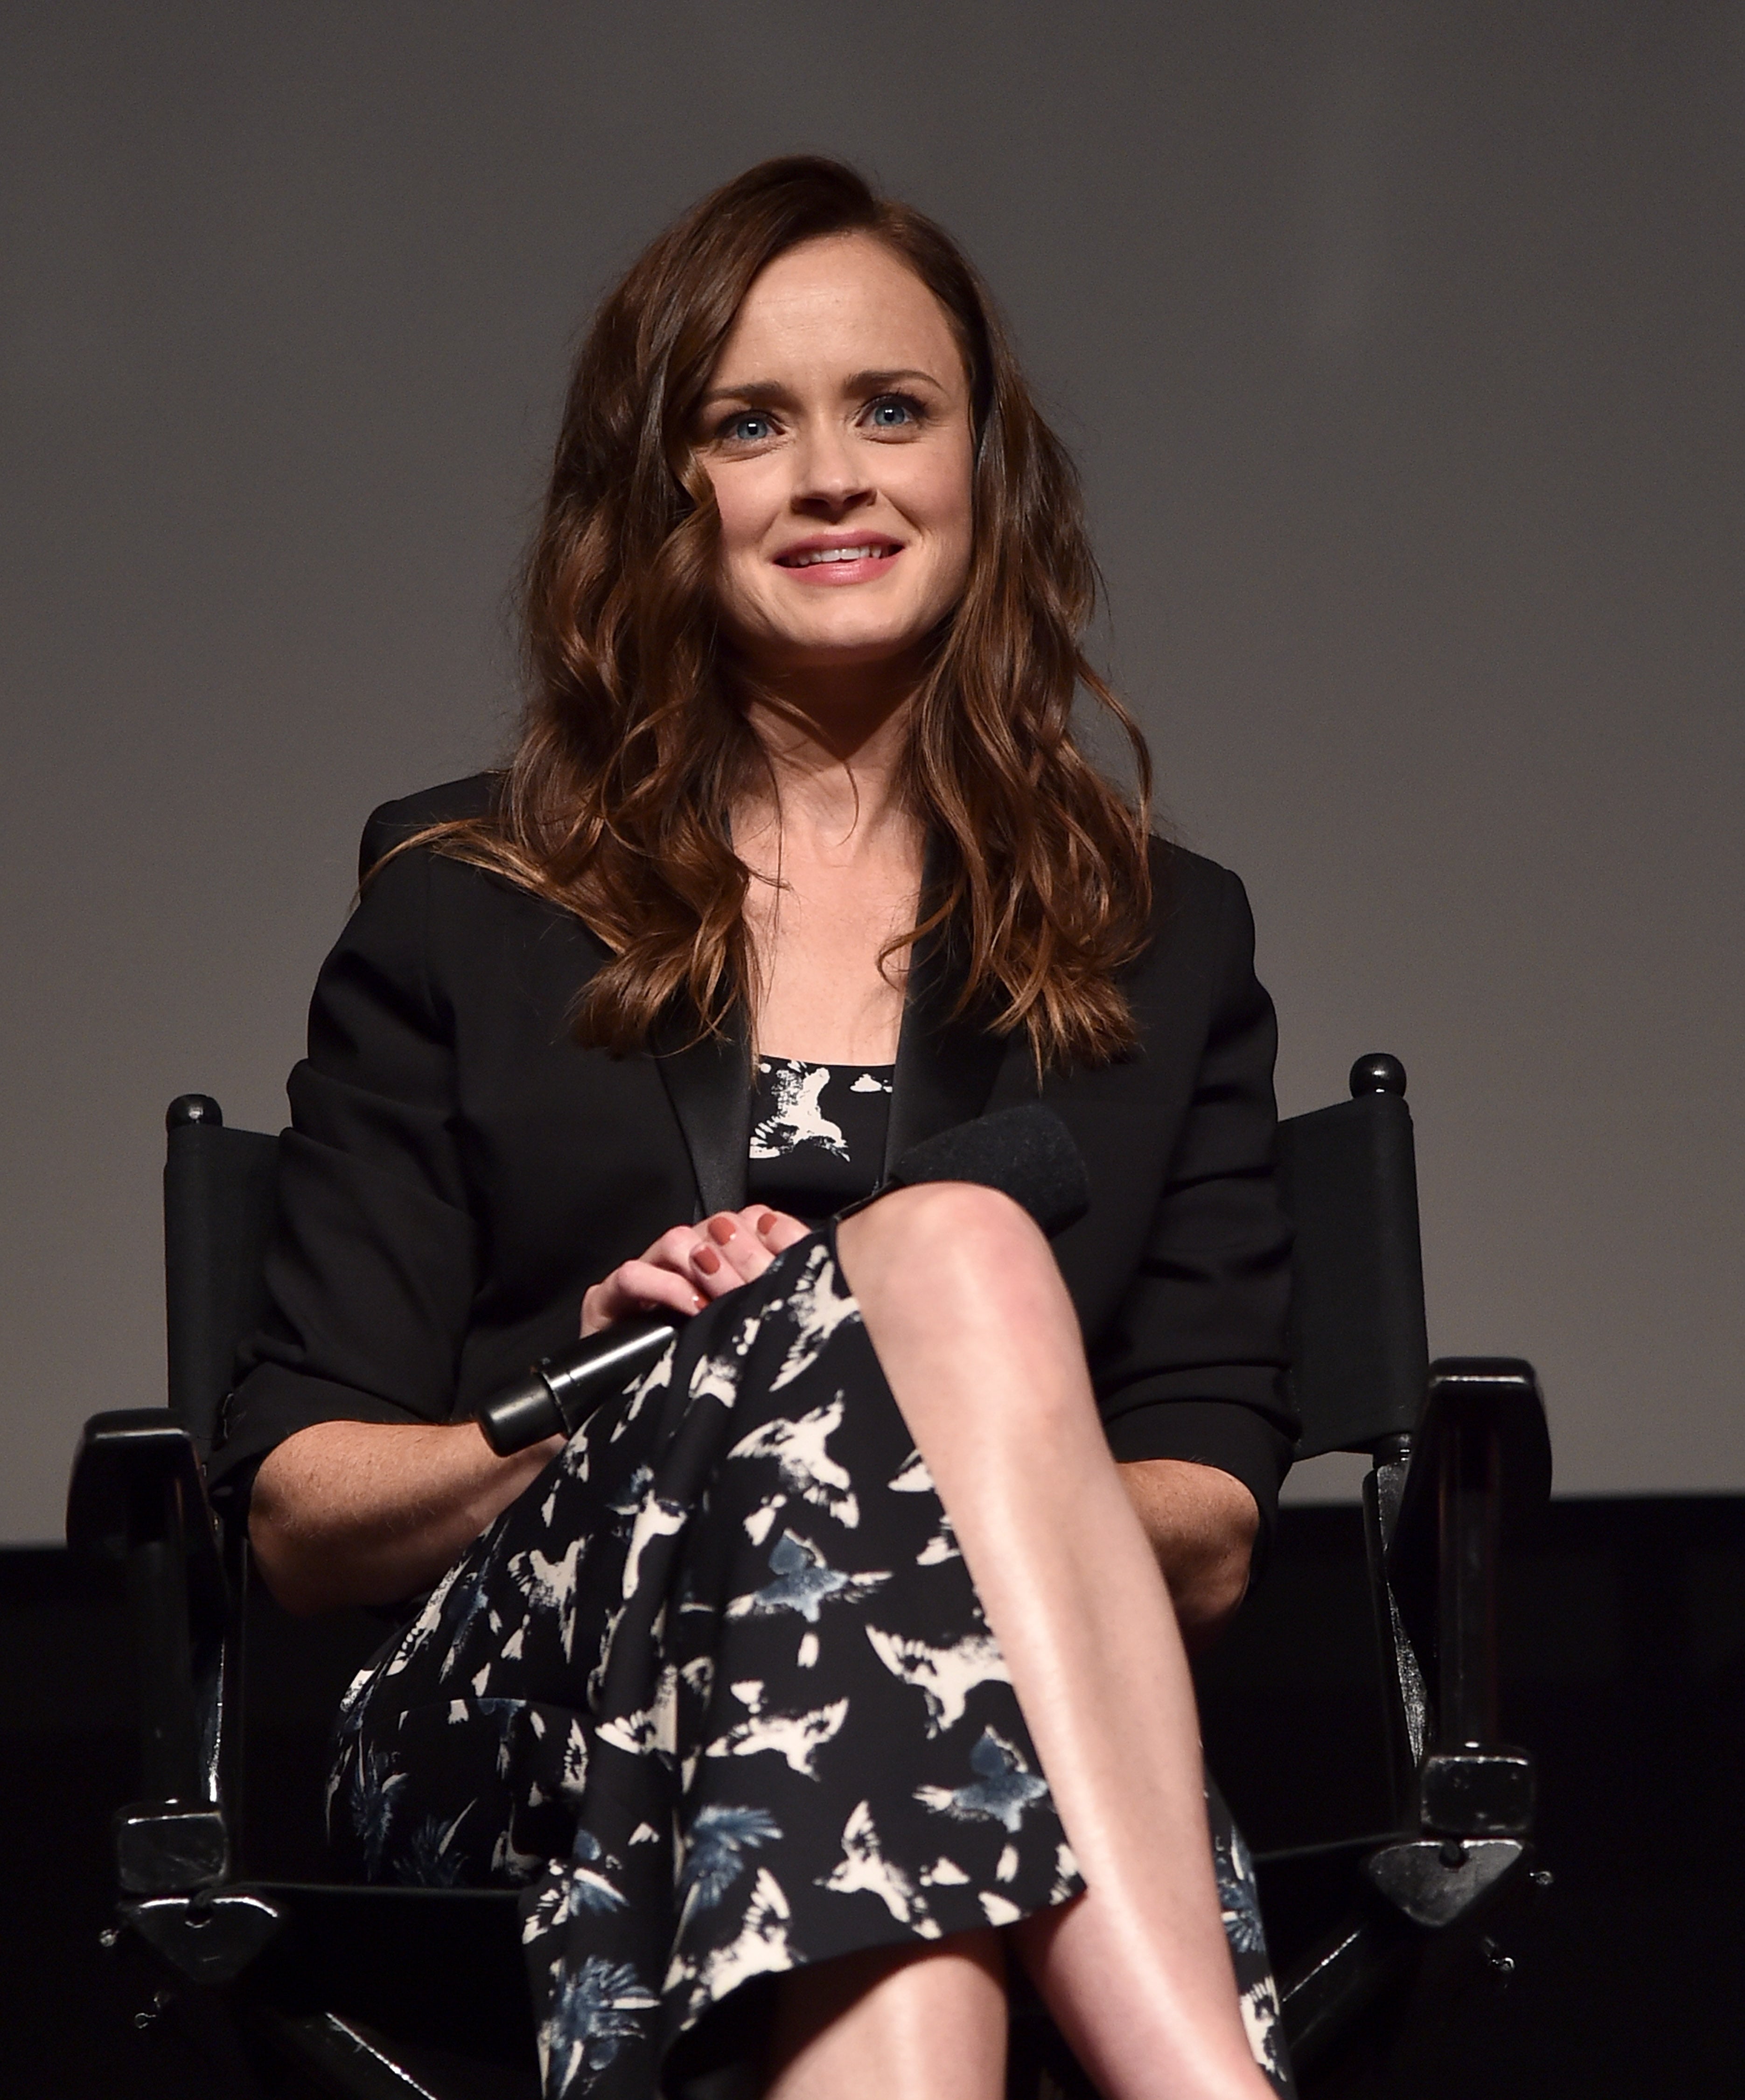 Alexis Bledel on Who Her Gilmore Girls Character Should've Been With